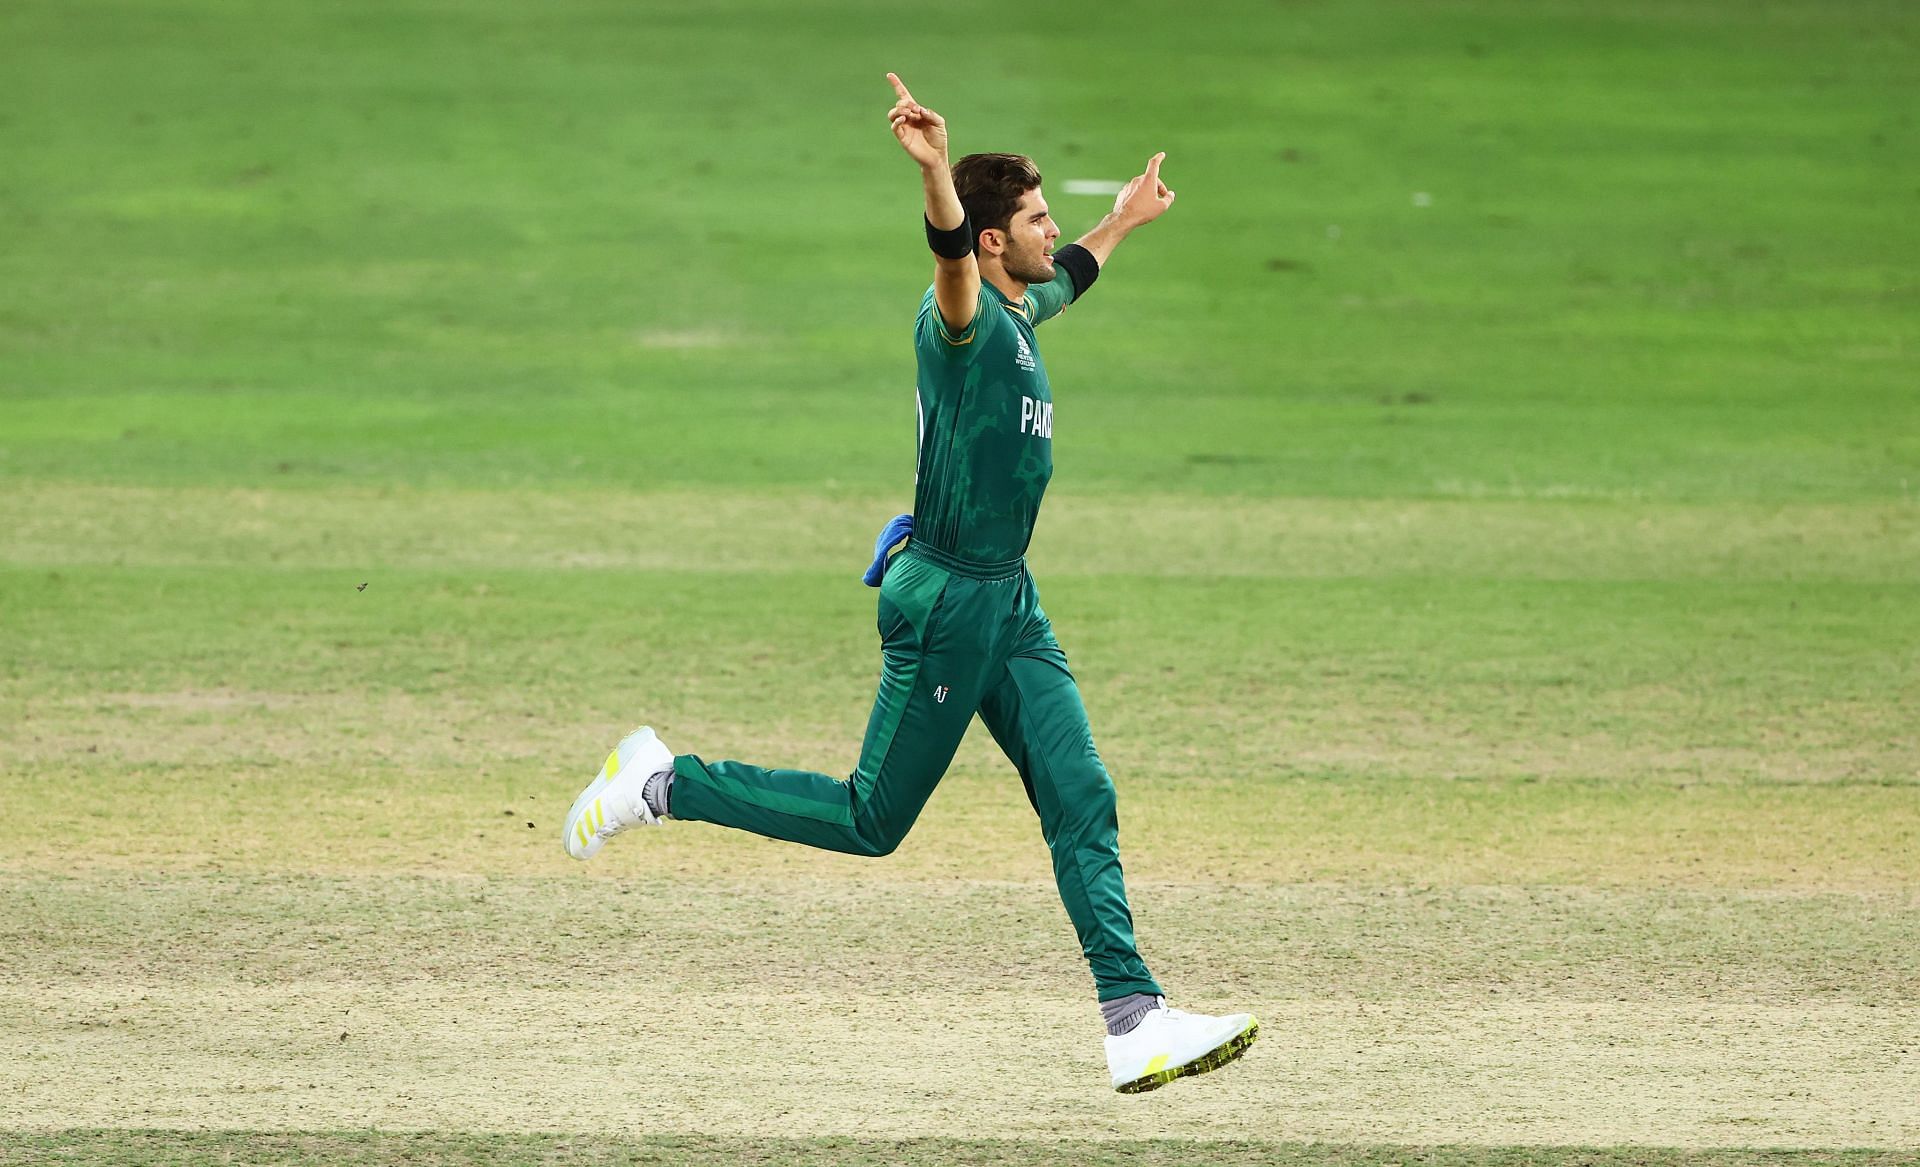 Shaheen Afridi has been ruled out of the Asia Cup due to an injury.